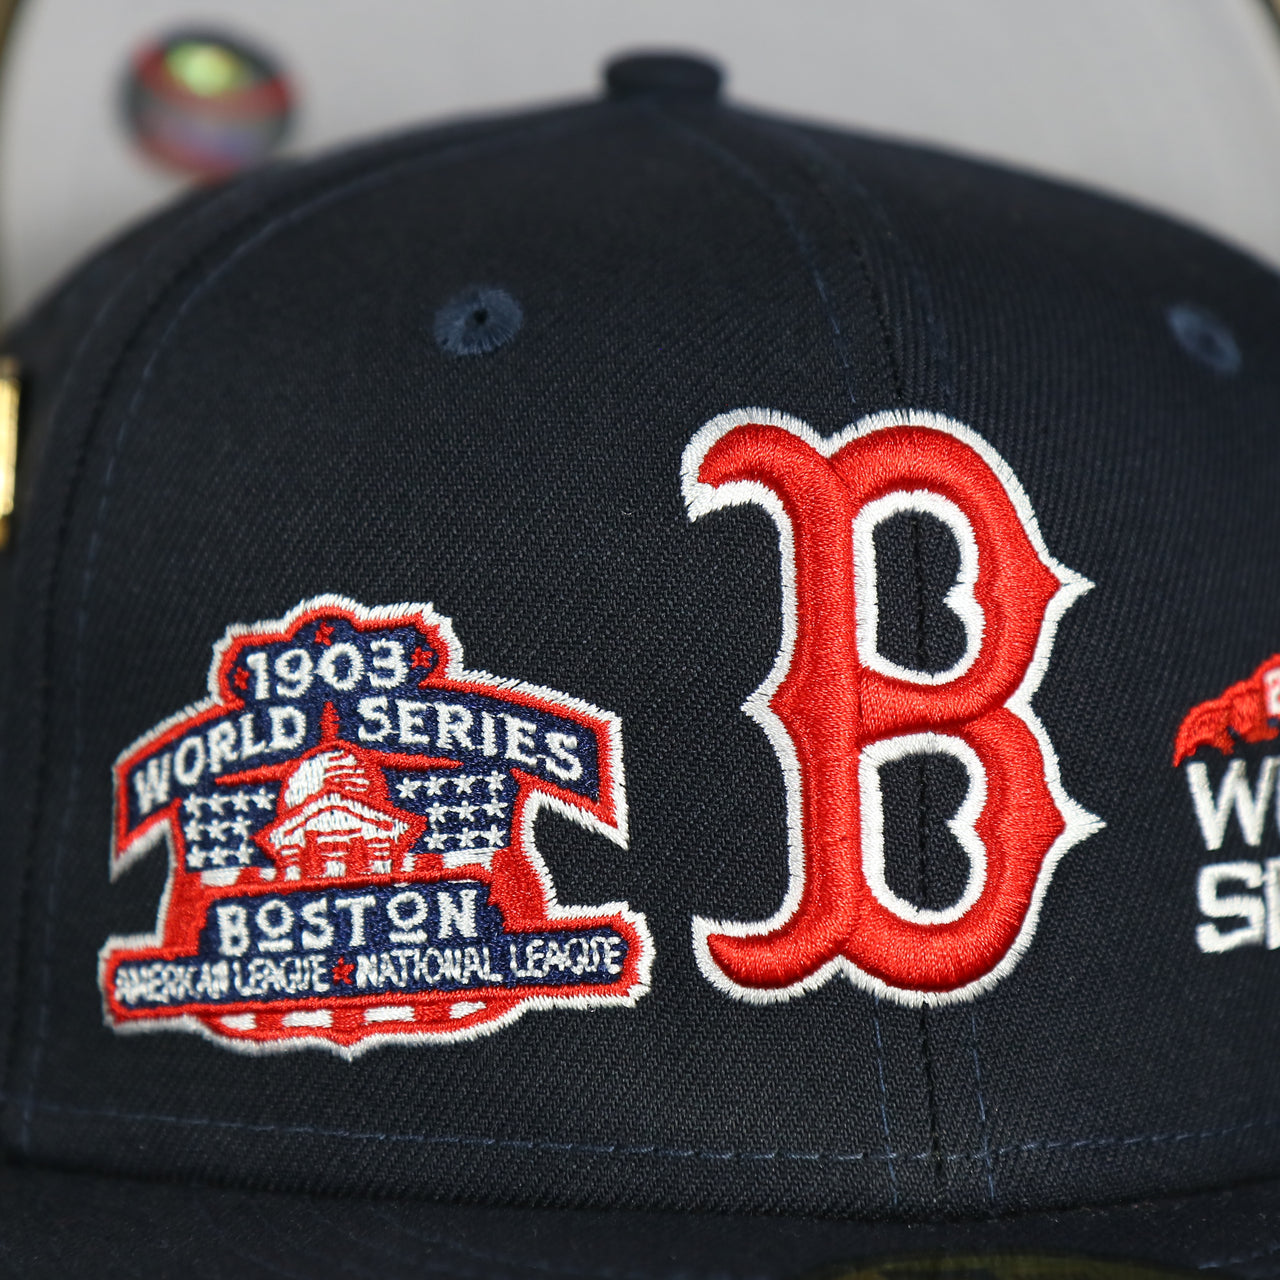 1903 world series patch and red sox logo on the Boston Red Sox Cooperstown All Over Side Patch "Historic Champs" Gray UV 59Fifty Fitted Cap | Navy 59Fifty Fitted Cap